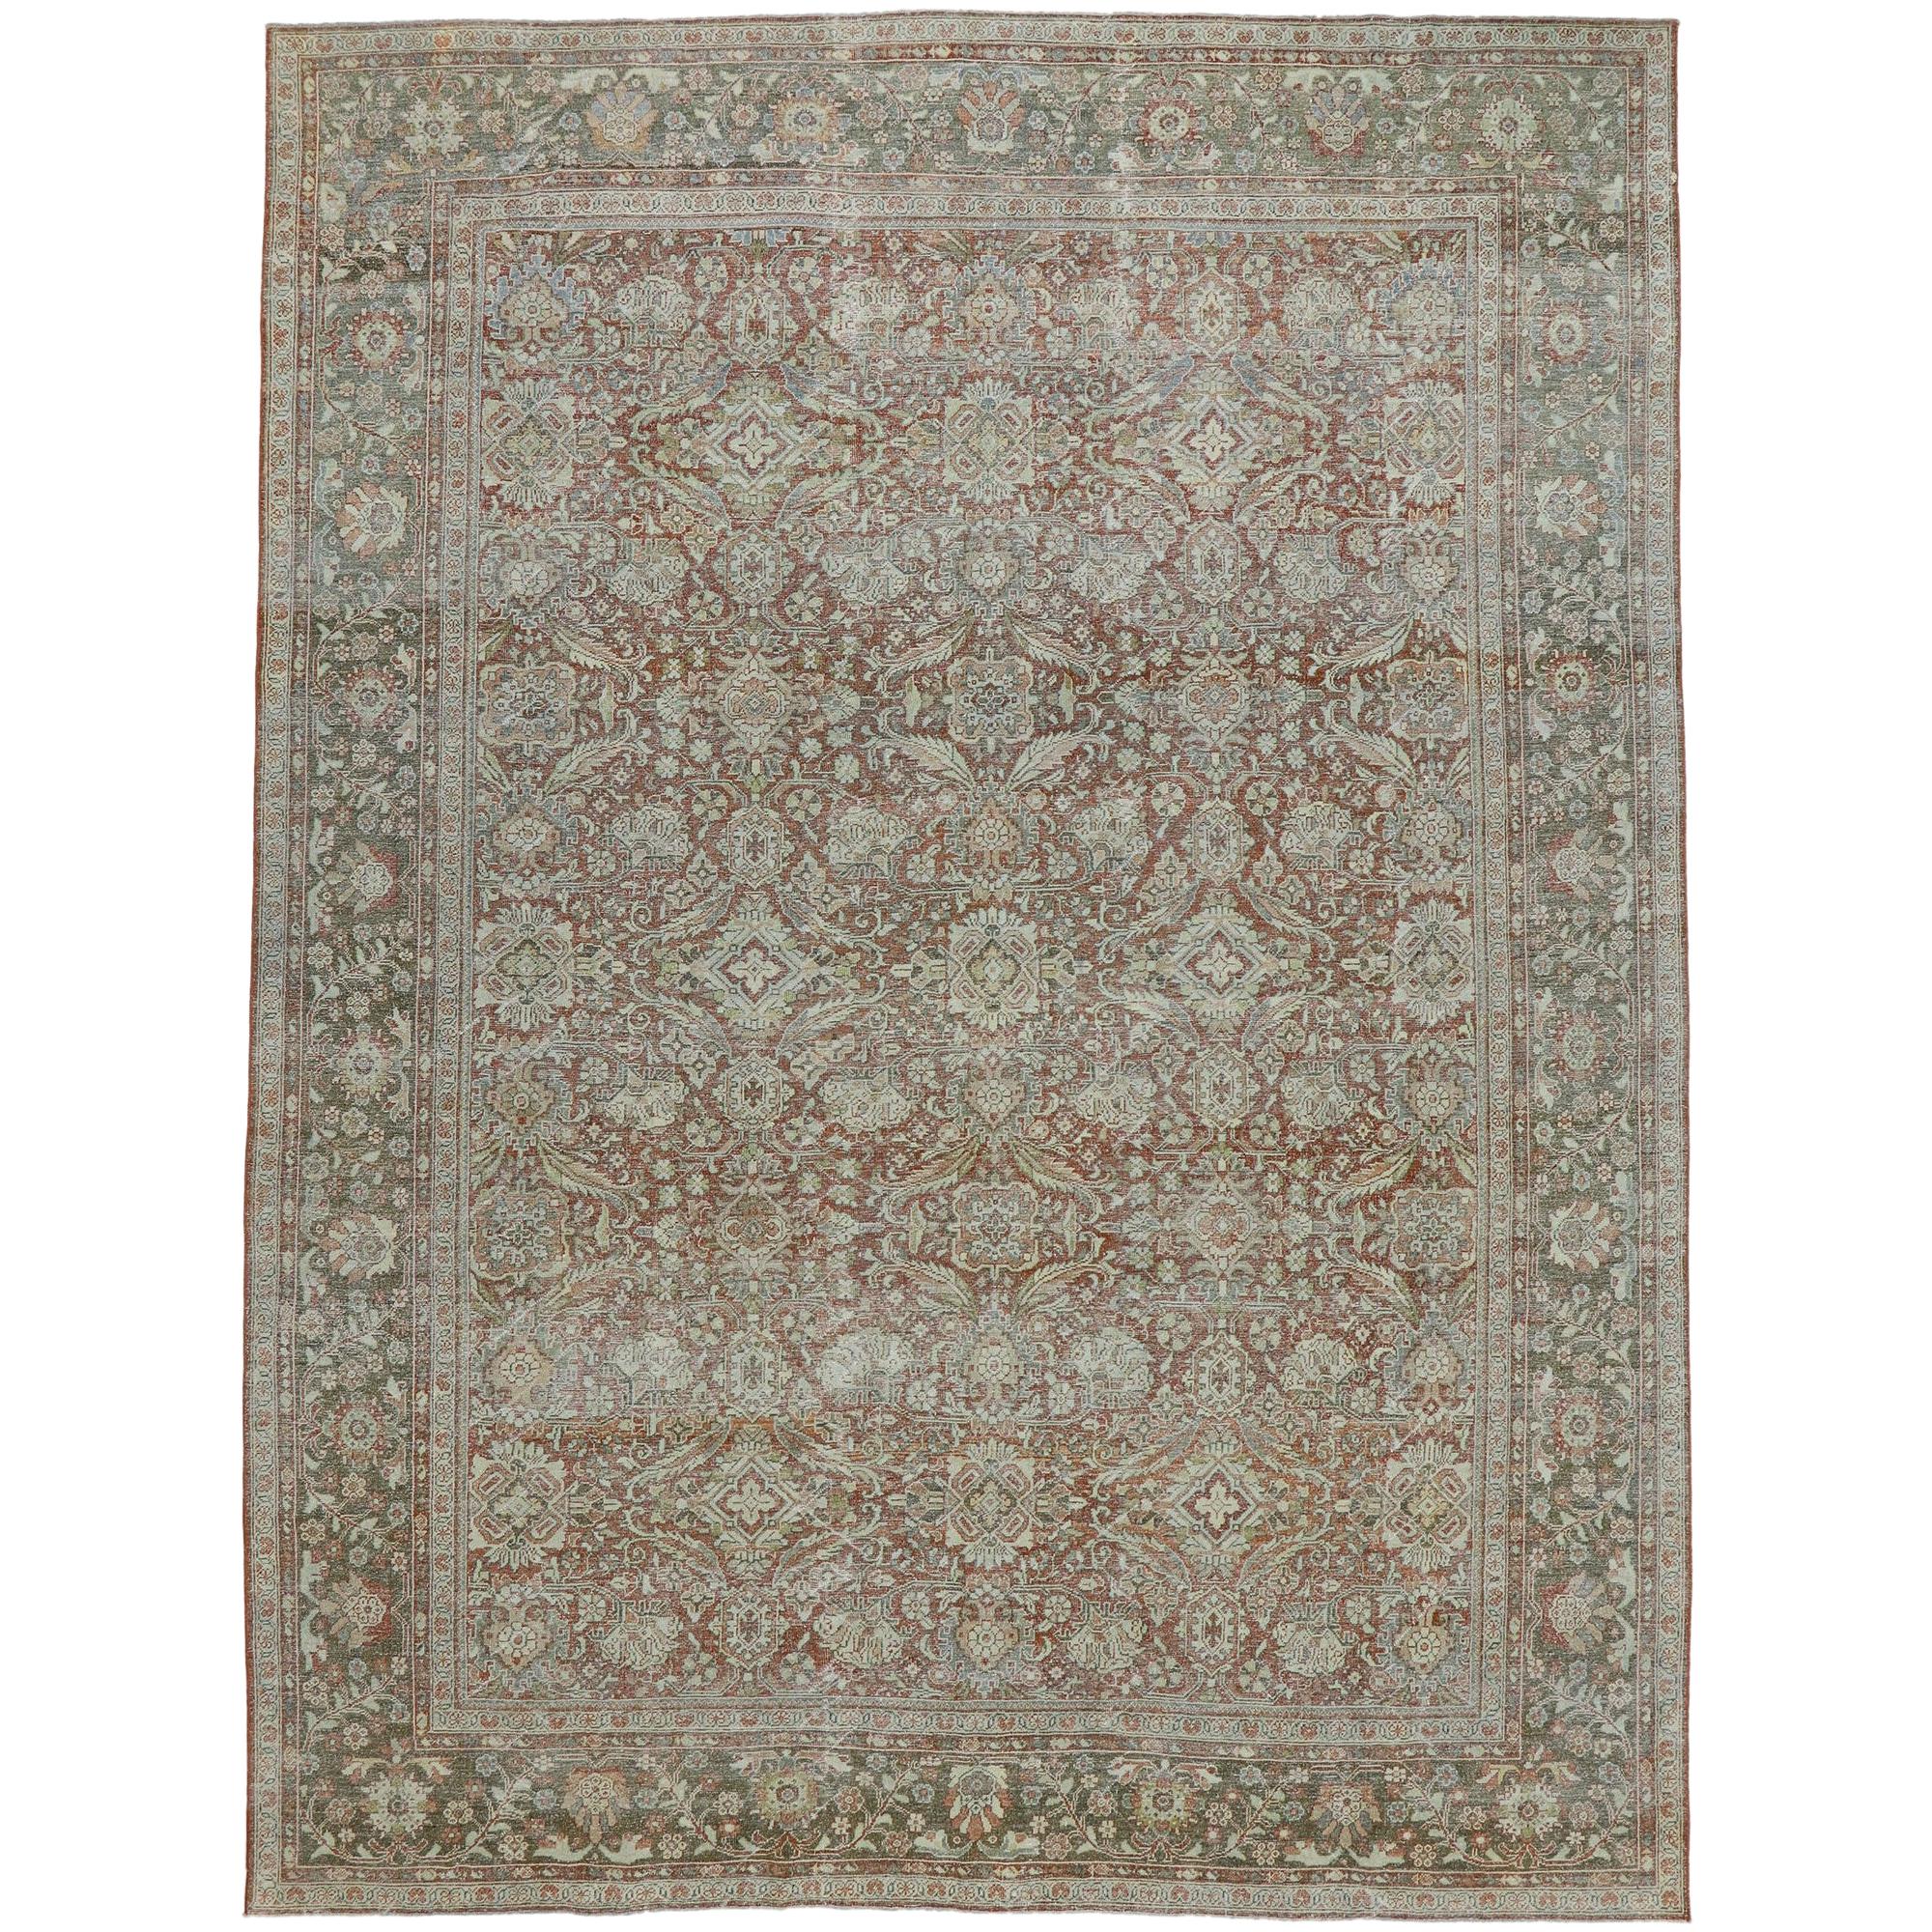 Distressed Antique Persian Mahal Rug with Rustic American Colonial Style For Sale